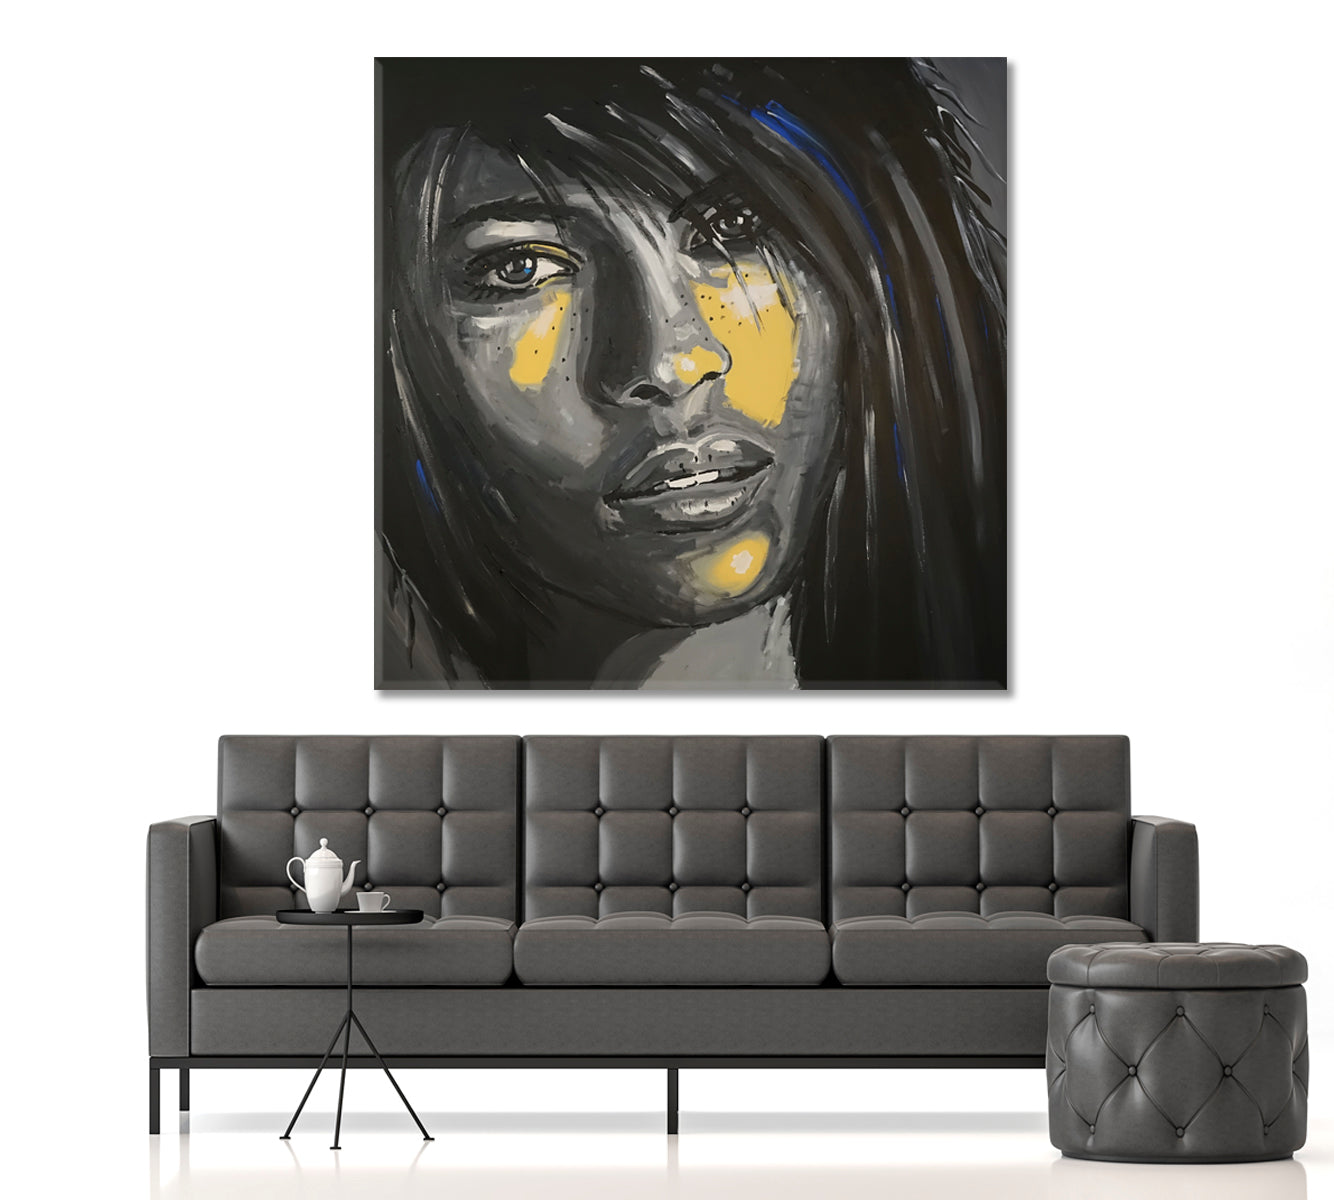 ABSTRACT REALISM Beautiful Woman Face Grunge Style Art | Square People Portrait Wall Hangings Artesty   